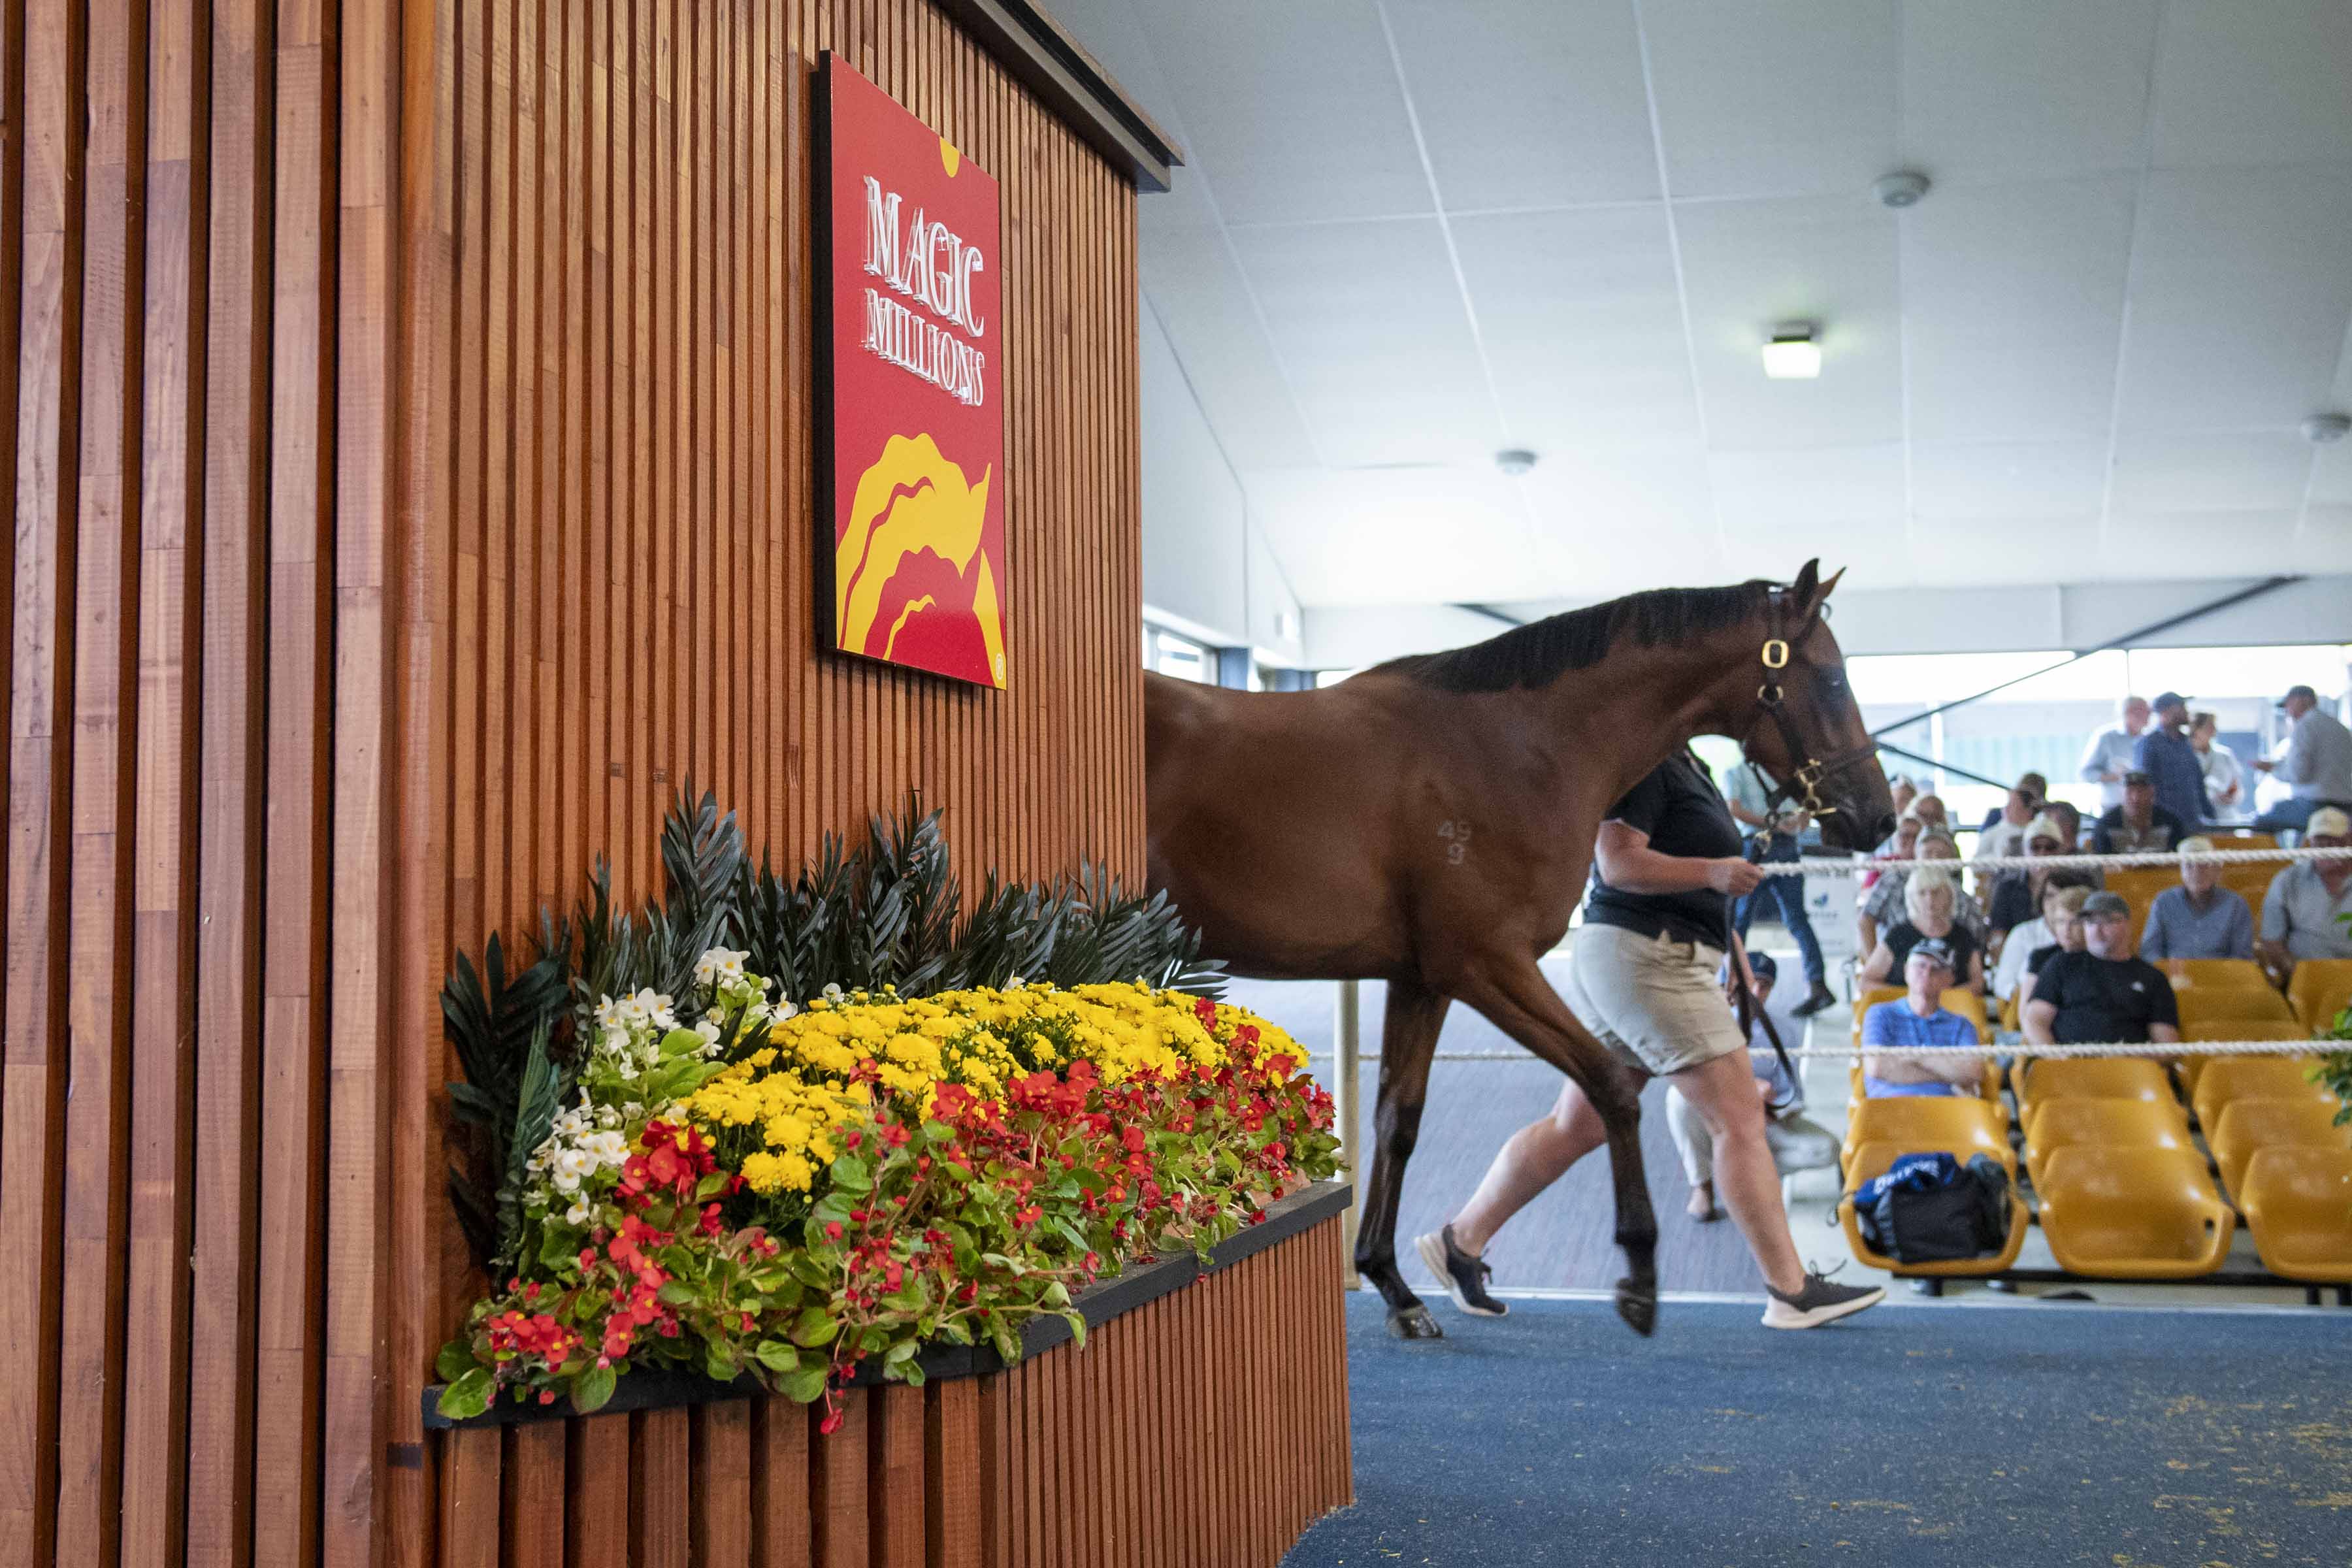 Magic Millions Adelaide Yearling Sale.